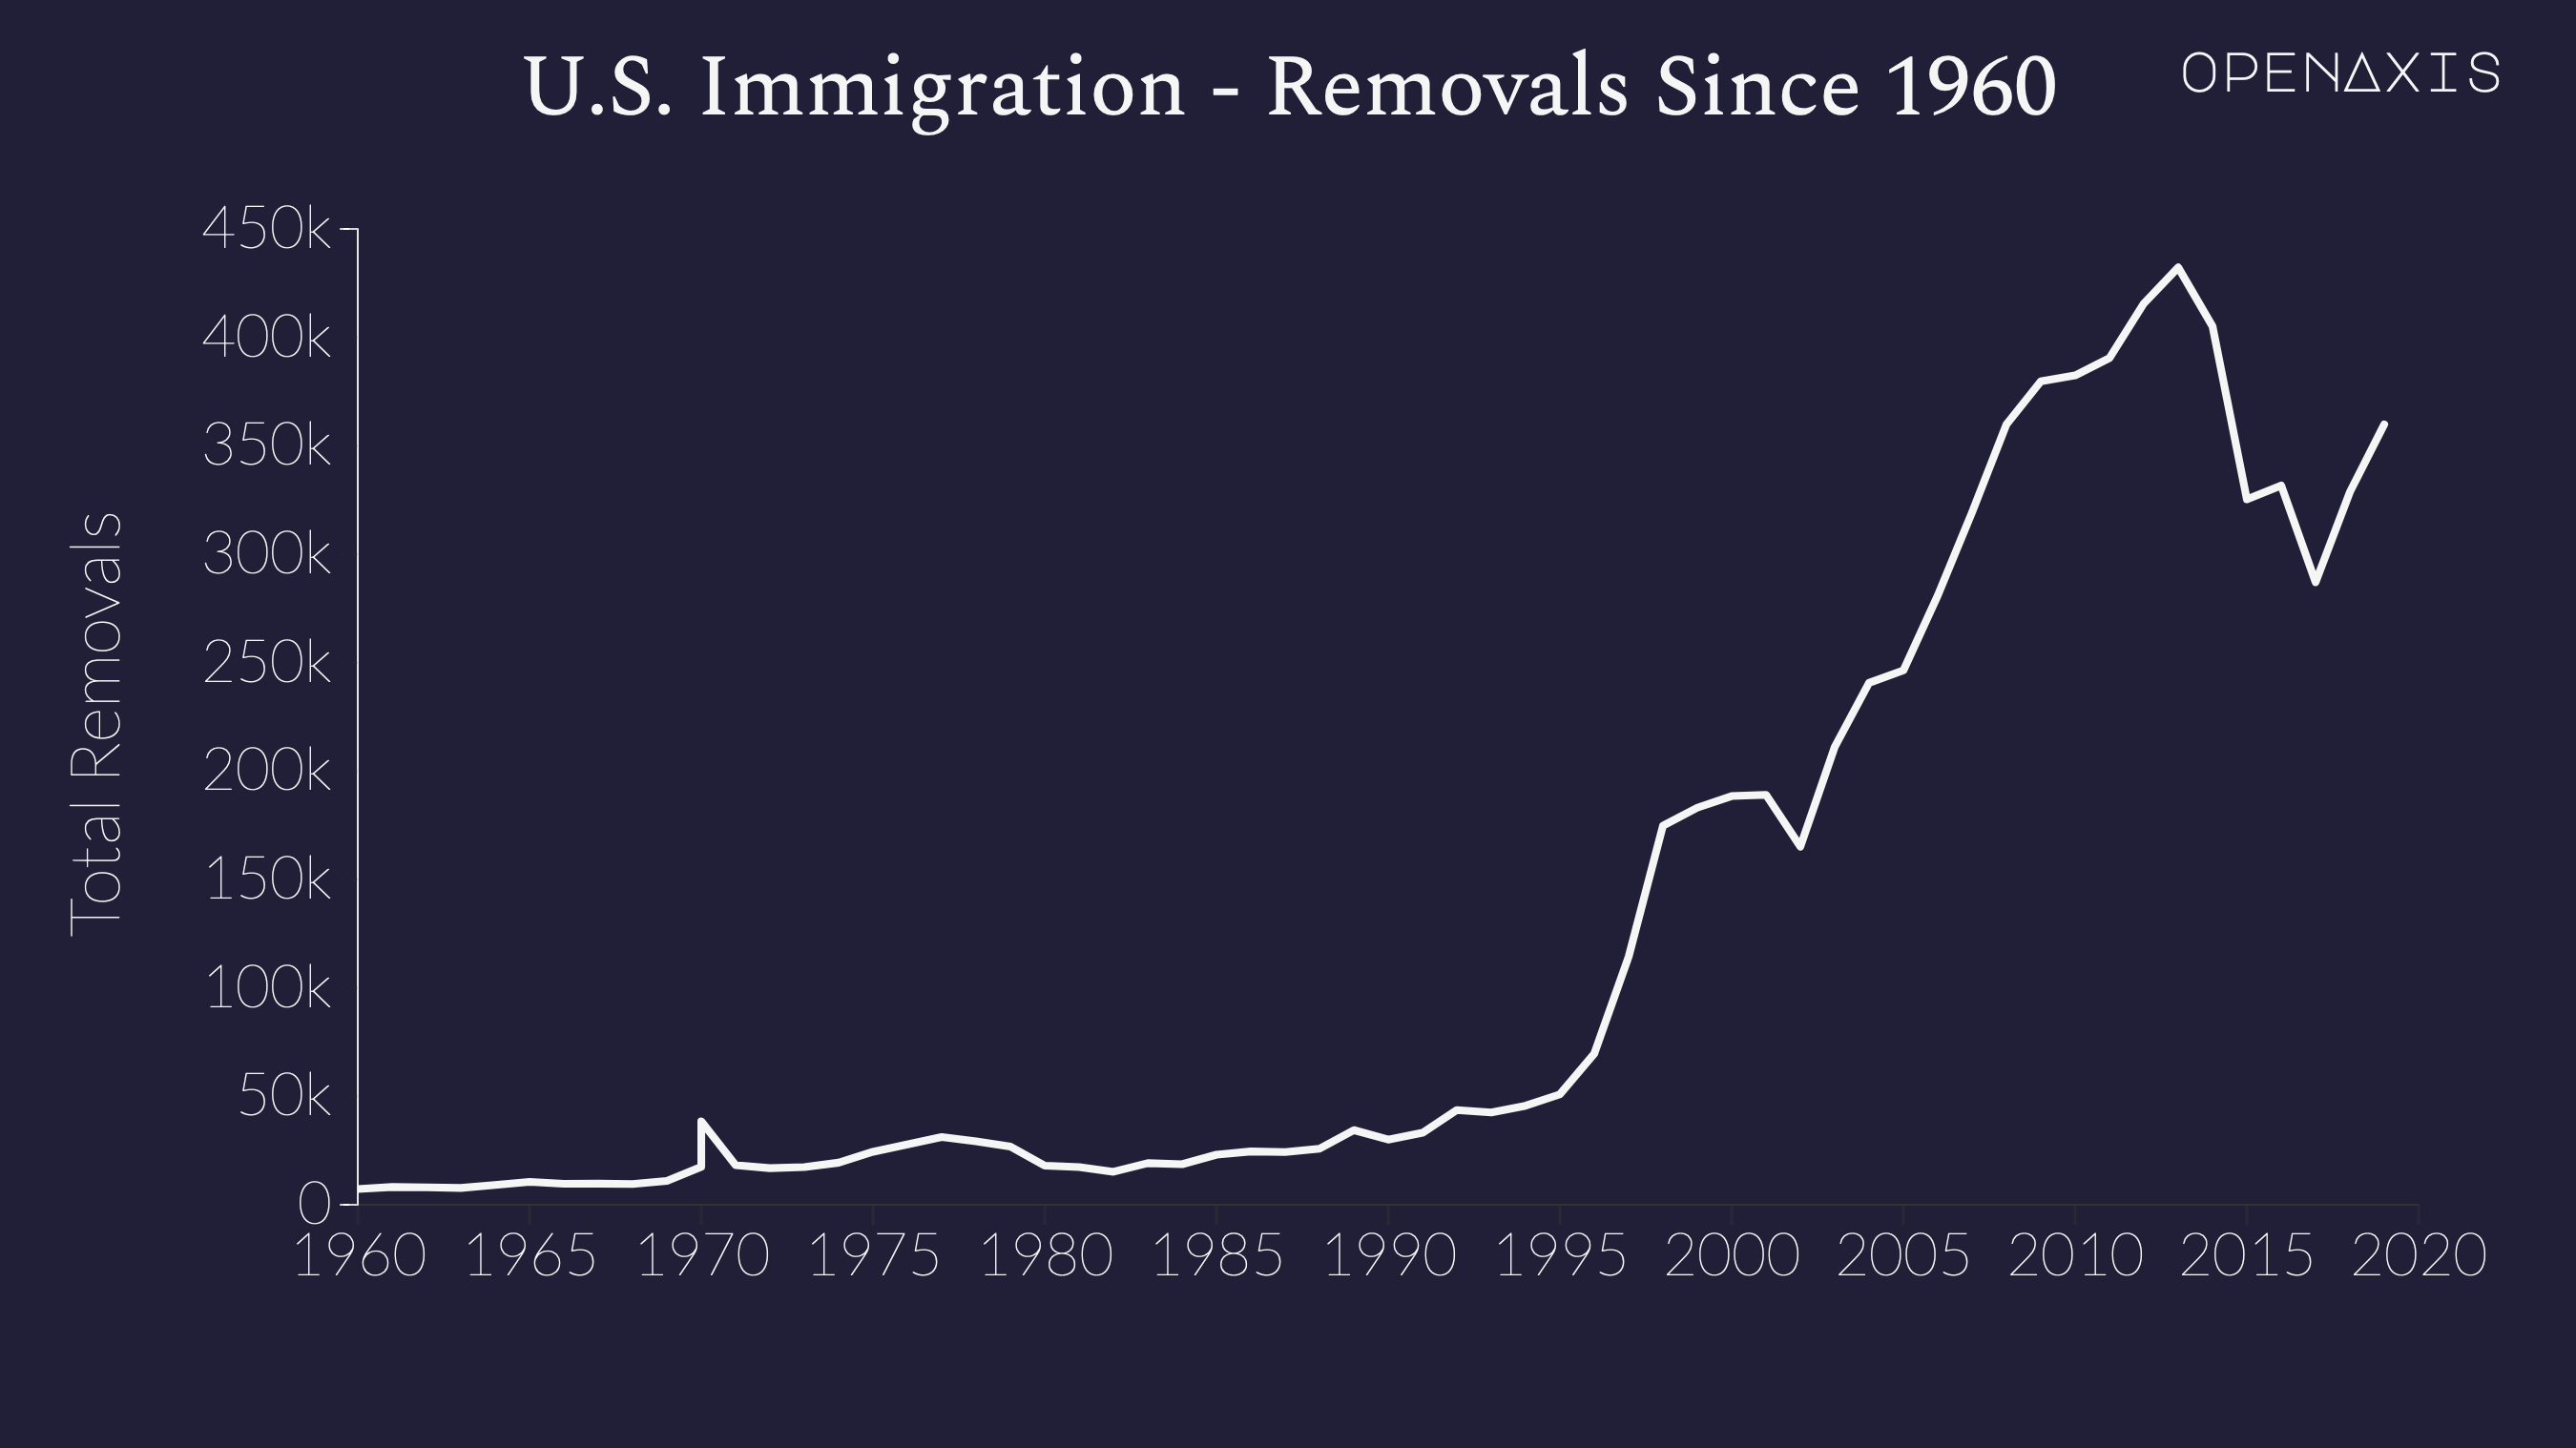 "U.S. Immigration - Removals Since 1960"